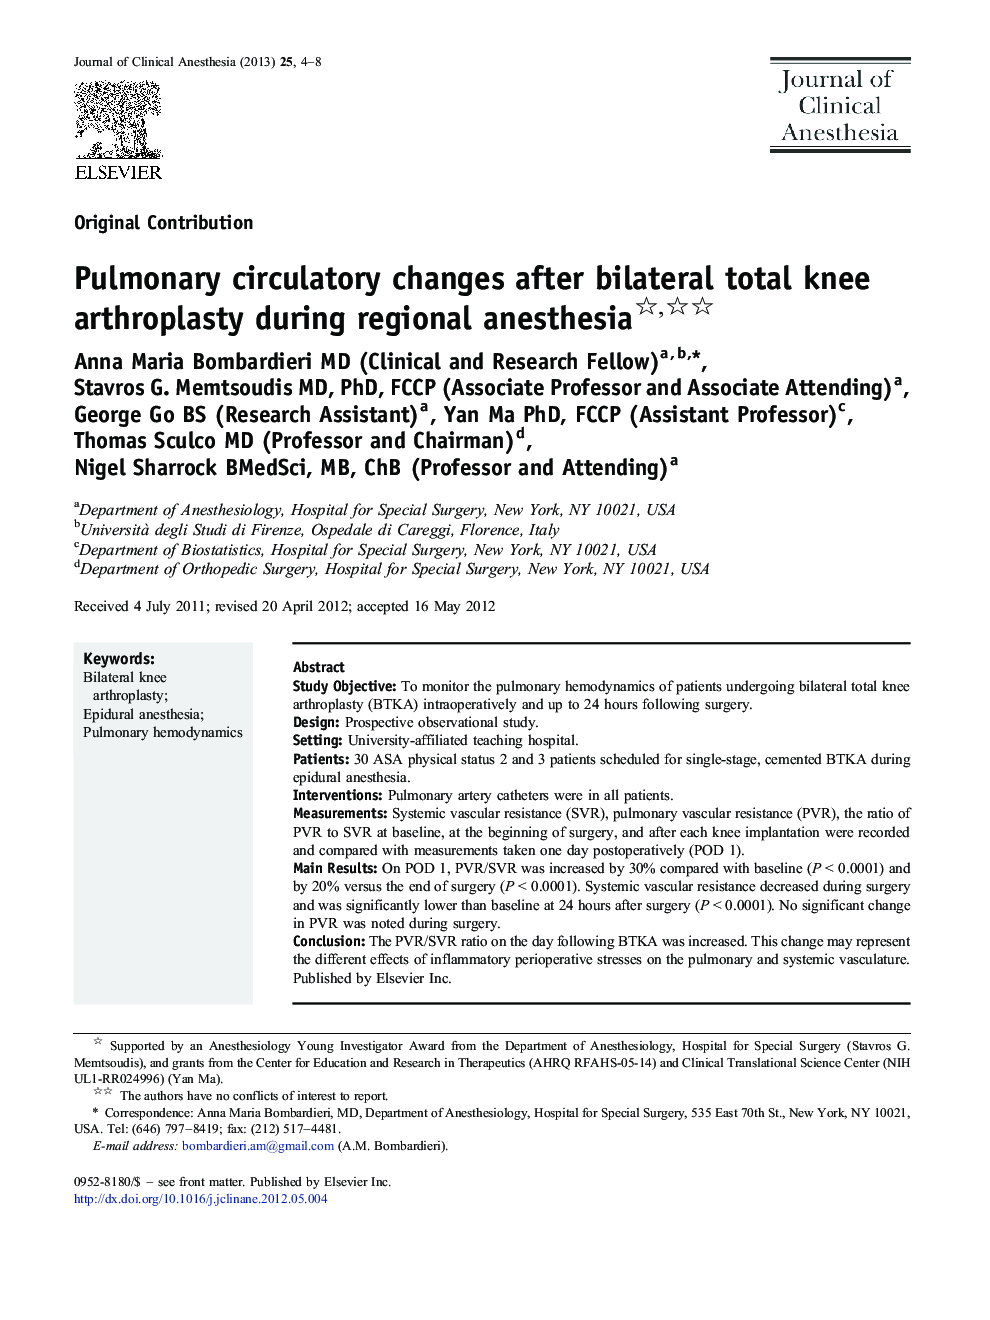 Pulmonary circulatory changes after bilateral total knee arthroplasty during regional anesthesia 